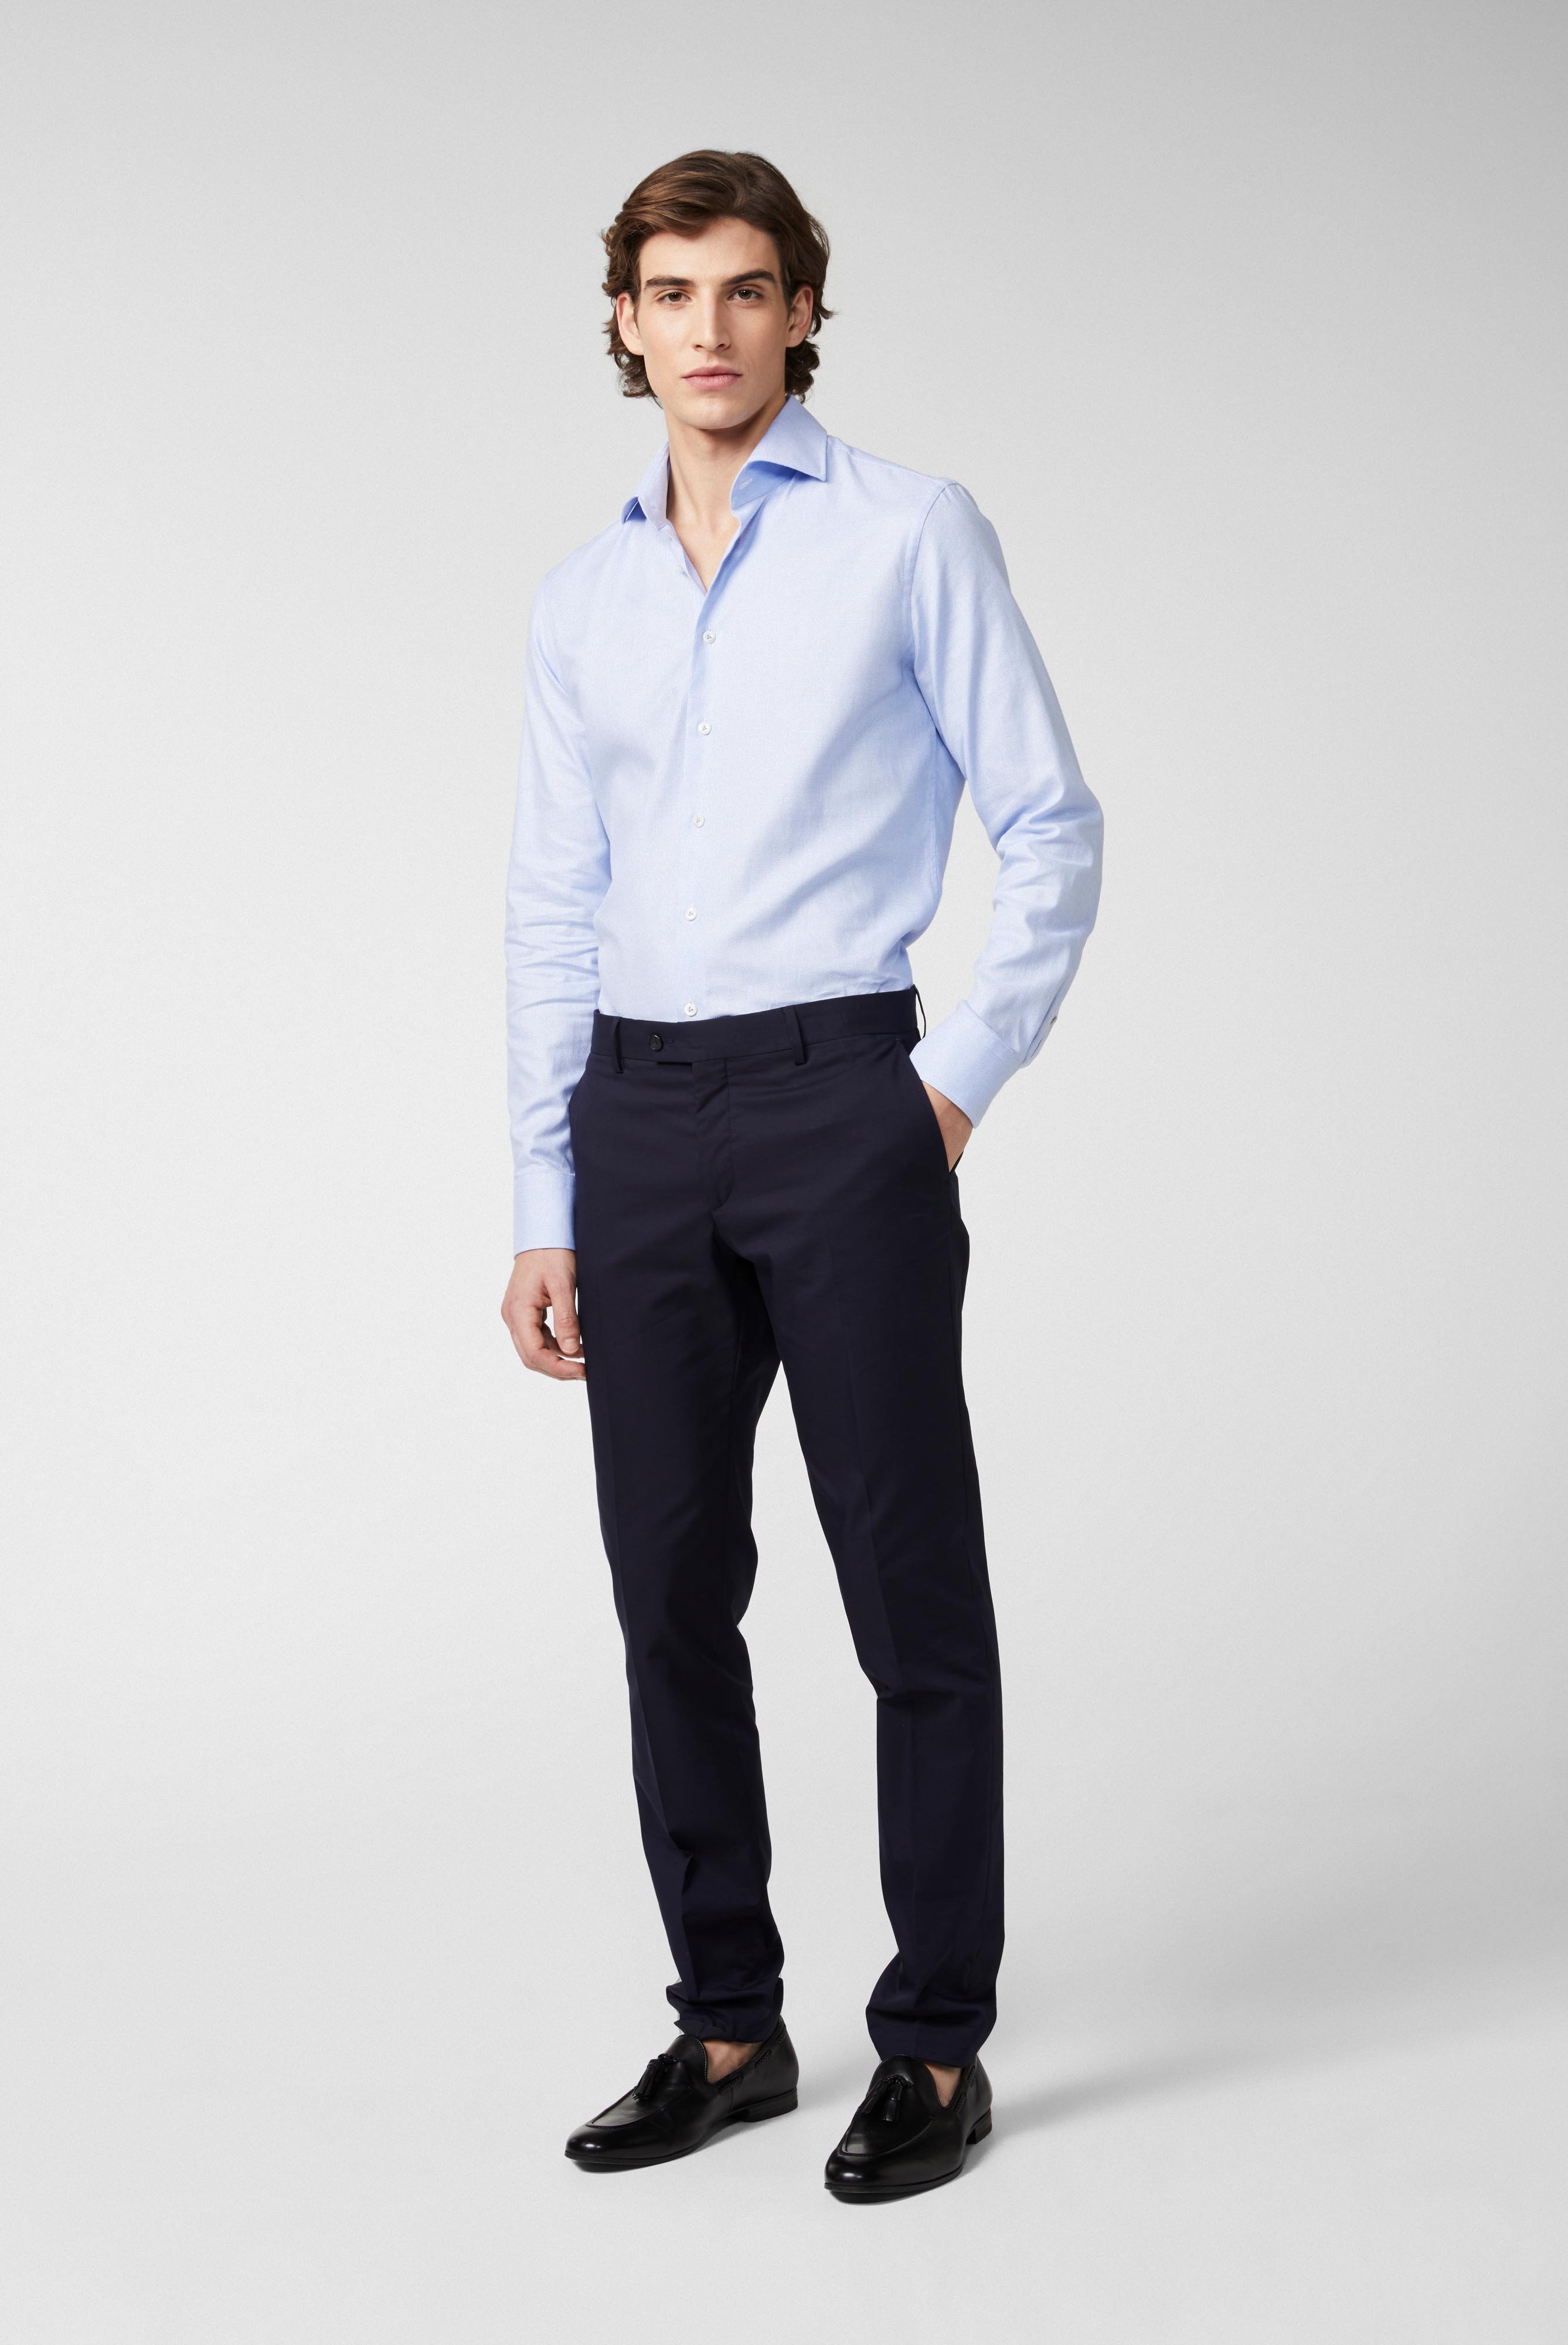 Business Shirts+Business shirt made of dobby cotton+20.3283.NV.161680.730.38